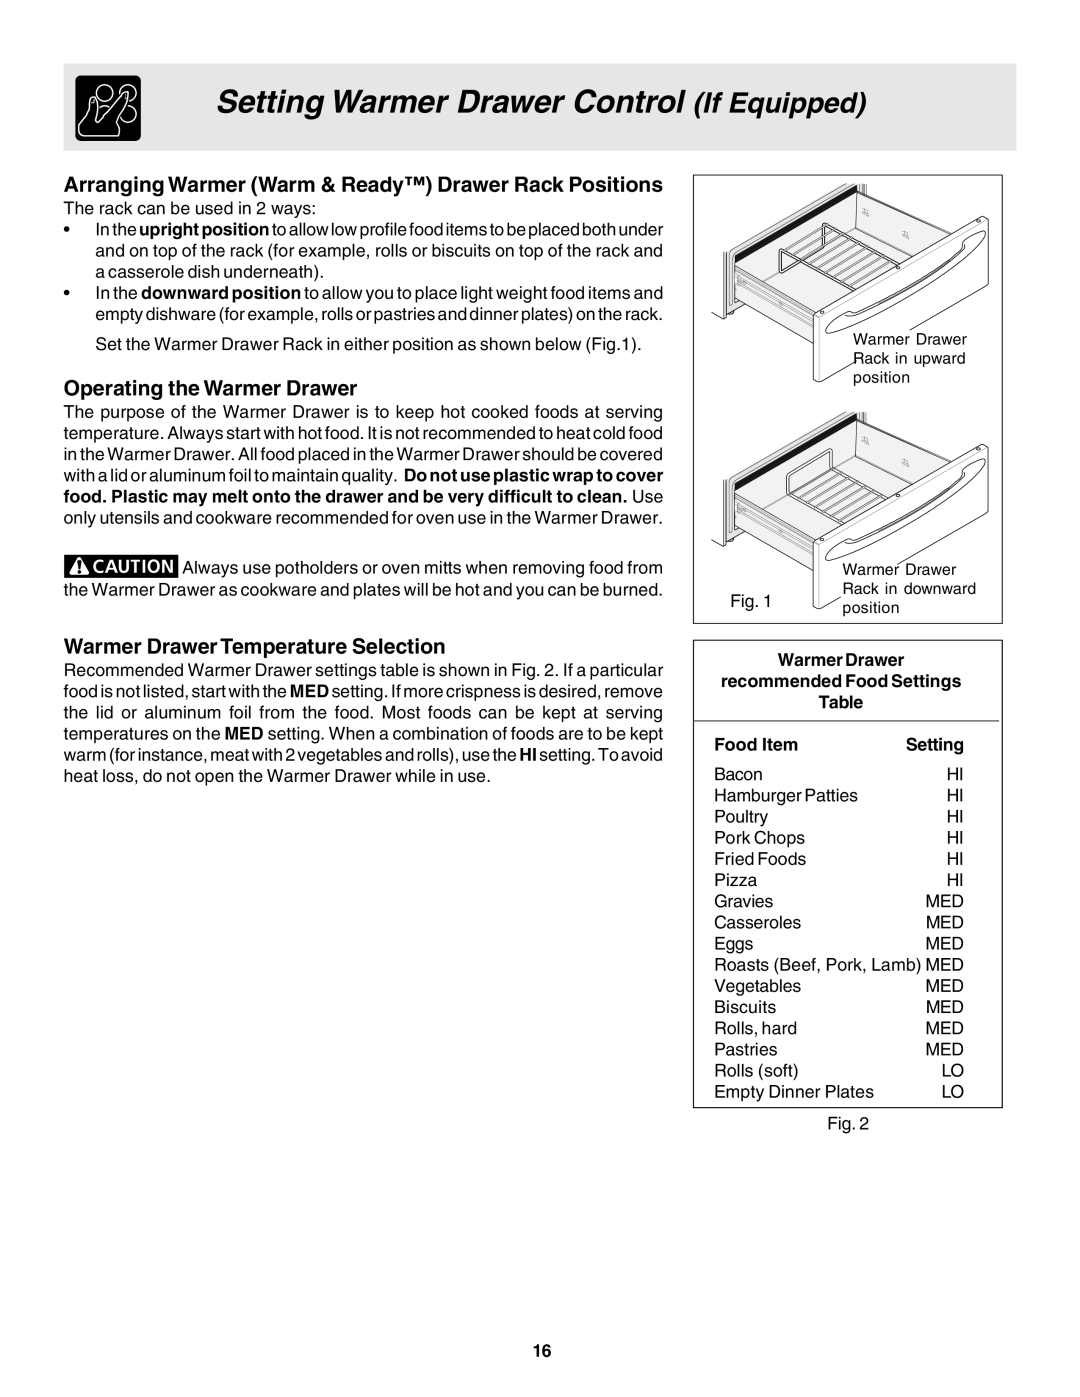 Frigidaire 318203860 warranty Setting Warmer Drawer Control If Equipped, Operating the Warmer Drawer, Food Item 